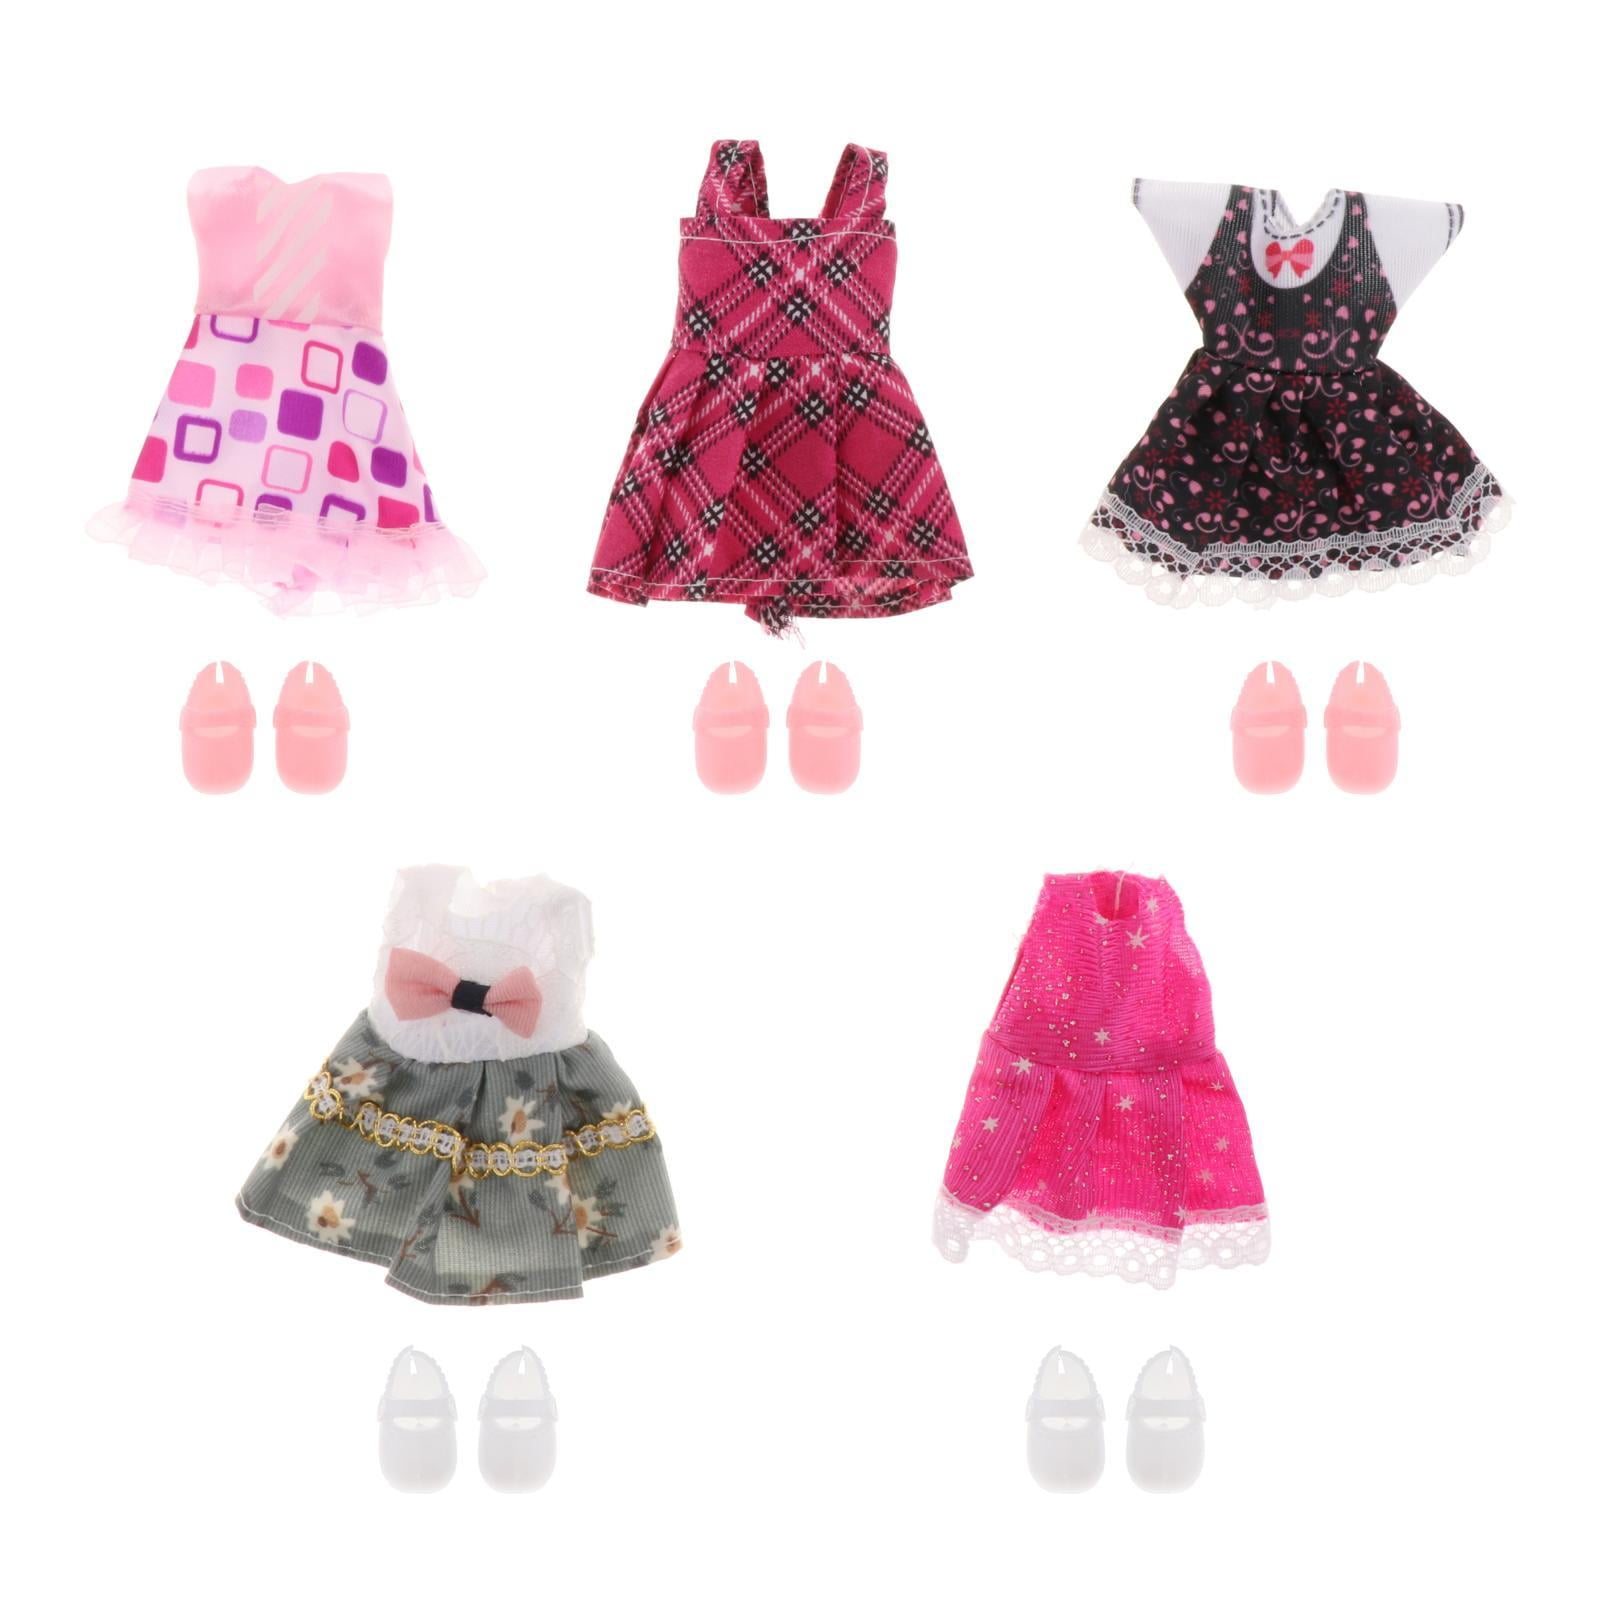 Dollhouse Modern Family Outfits Miniature 1:12 Scale Dolls Clothing Set ...